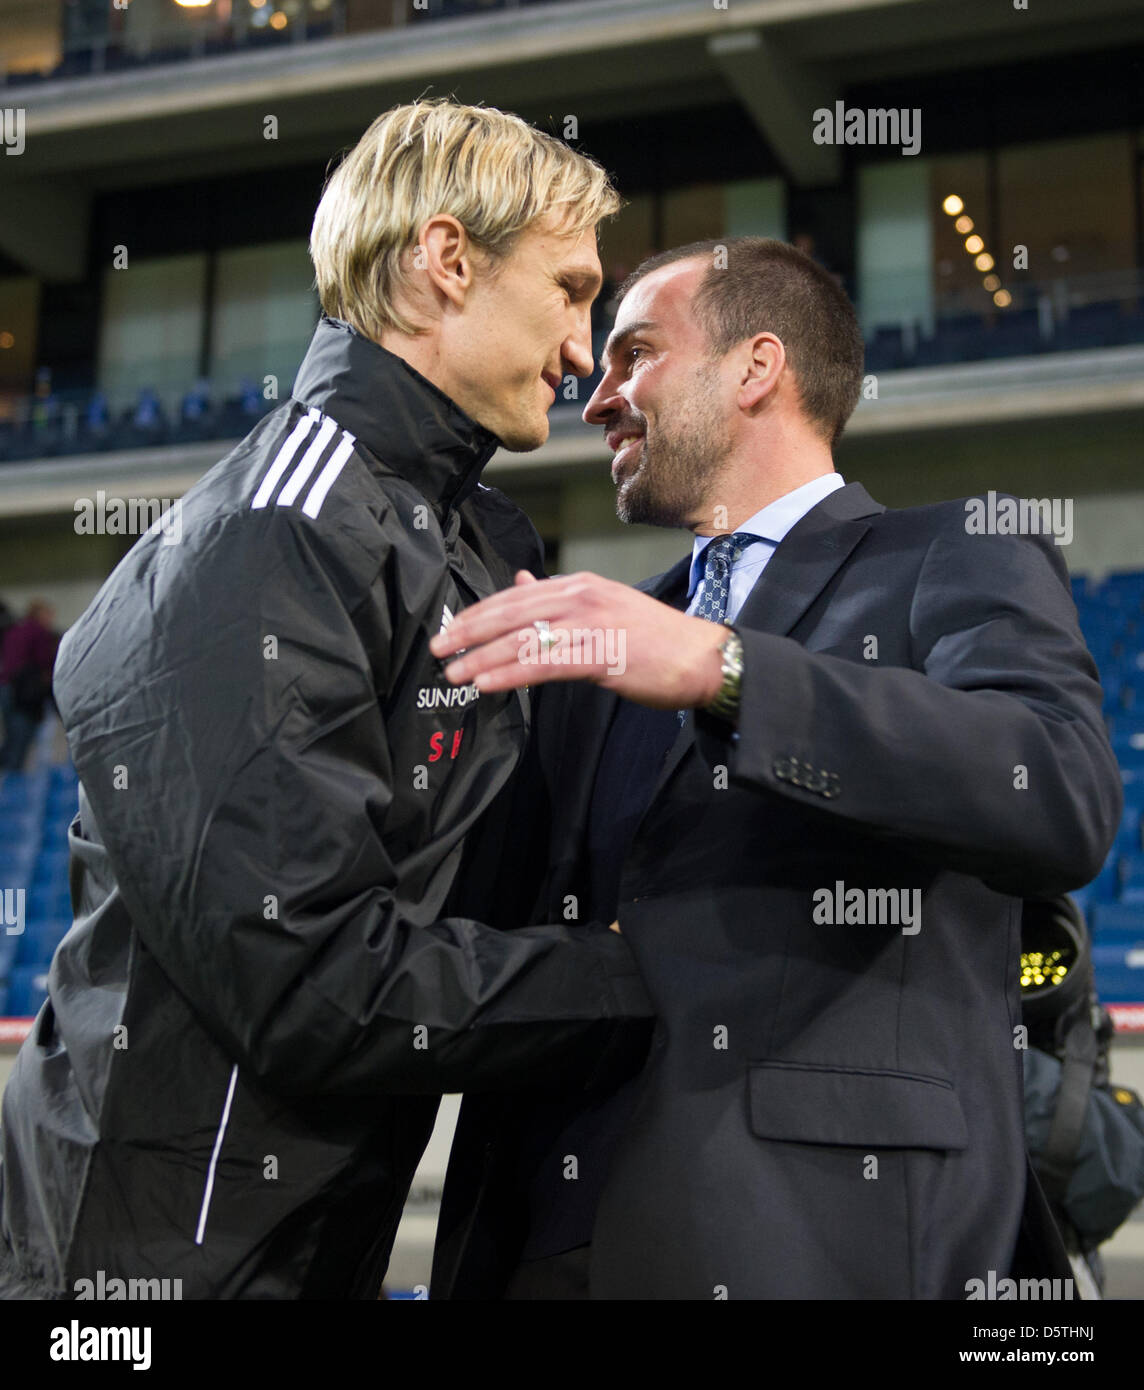 Hoffenheim's head coach Markus Babbel (R) and Leverkusen's team chef Sami Hyypia shake hands prior to the German Bundesliga soccer match 1899 Hoffenheim vs Bayer 04 Leverkusen at Rhein Neckar Arena in Sinsheim, Germany, 25 November 2012. Photo: Uwe Anspach  (ATTENTION: EMBARGO CONDITIONS! The DFL permits the further utilisation of up to 15 pictures only (no sequntial pictures or vi Stock Photo